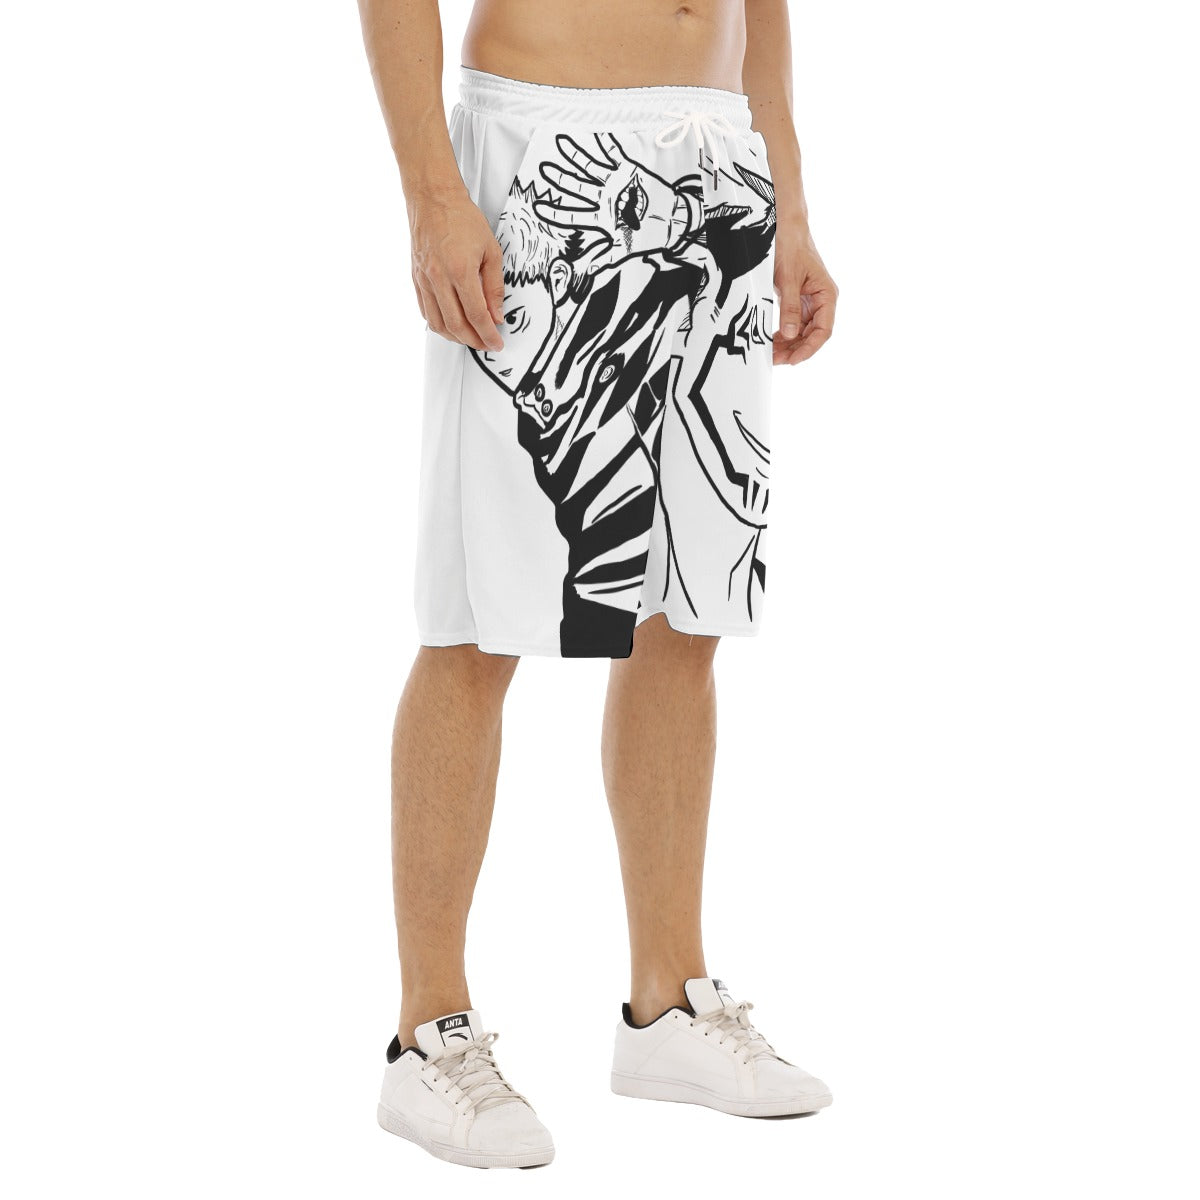 "CURSED KING VESSEL Tether Loose Shorts